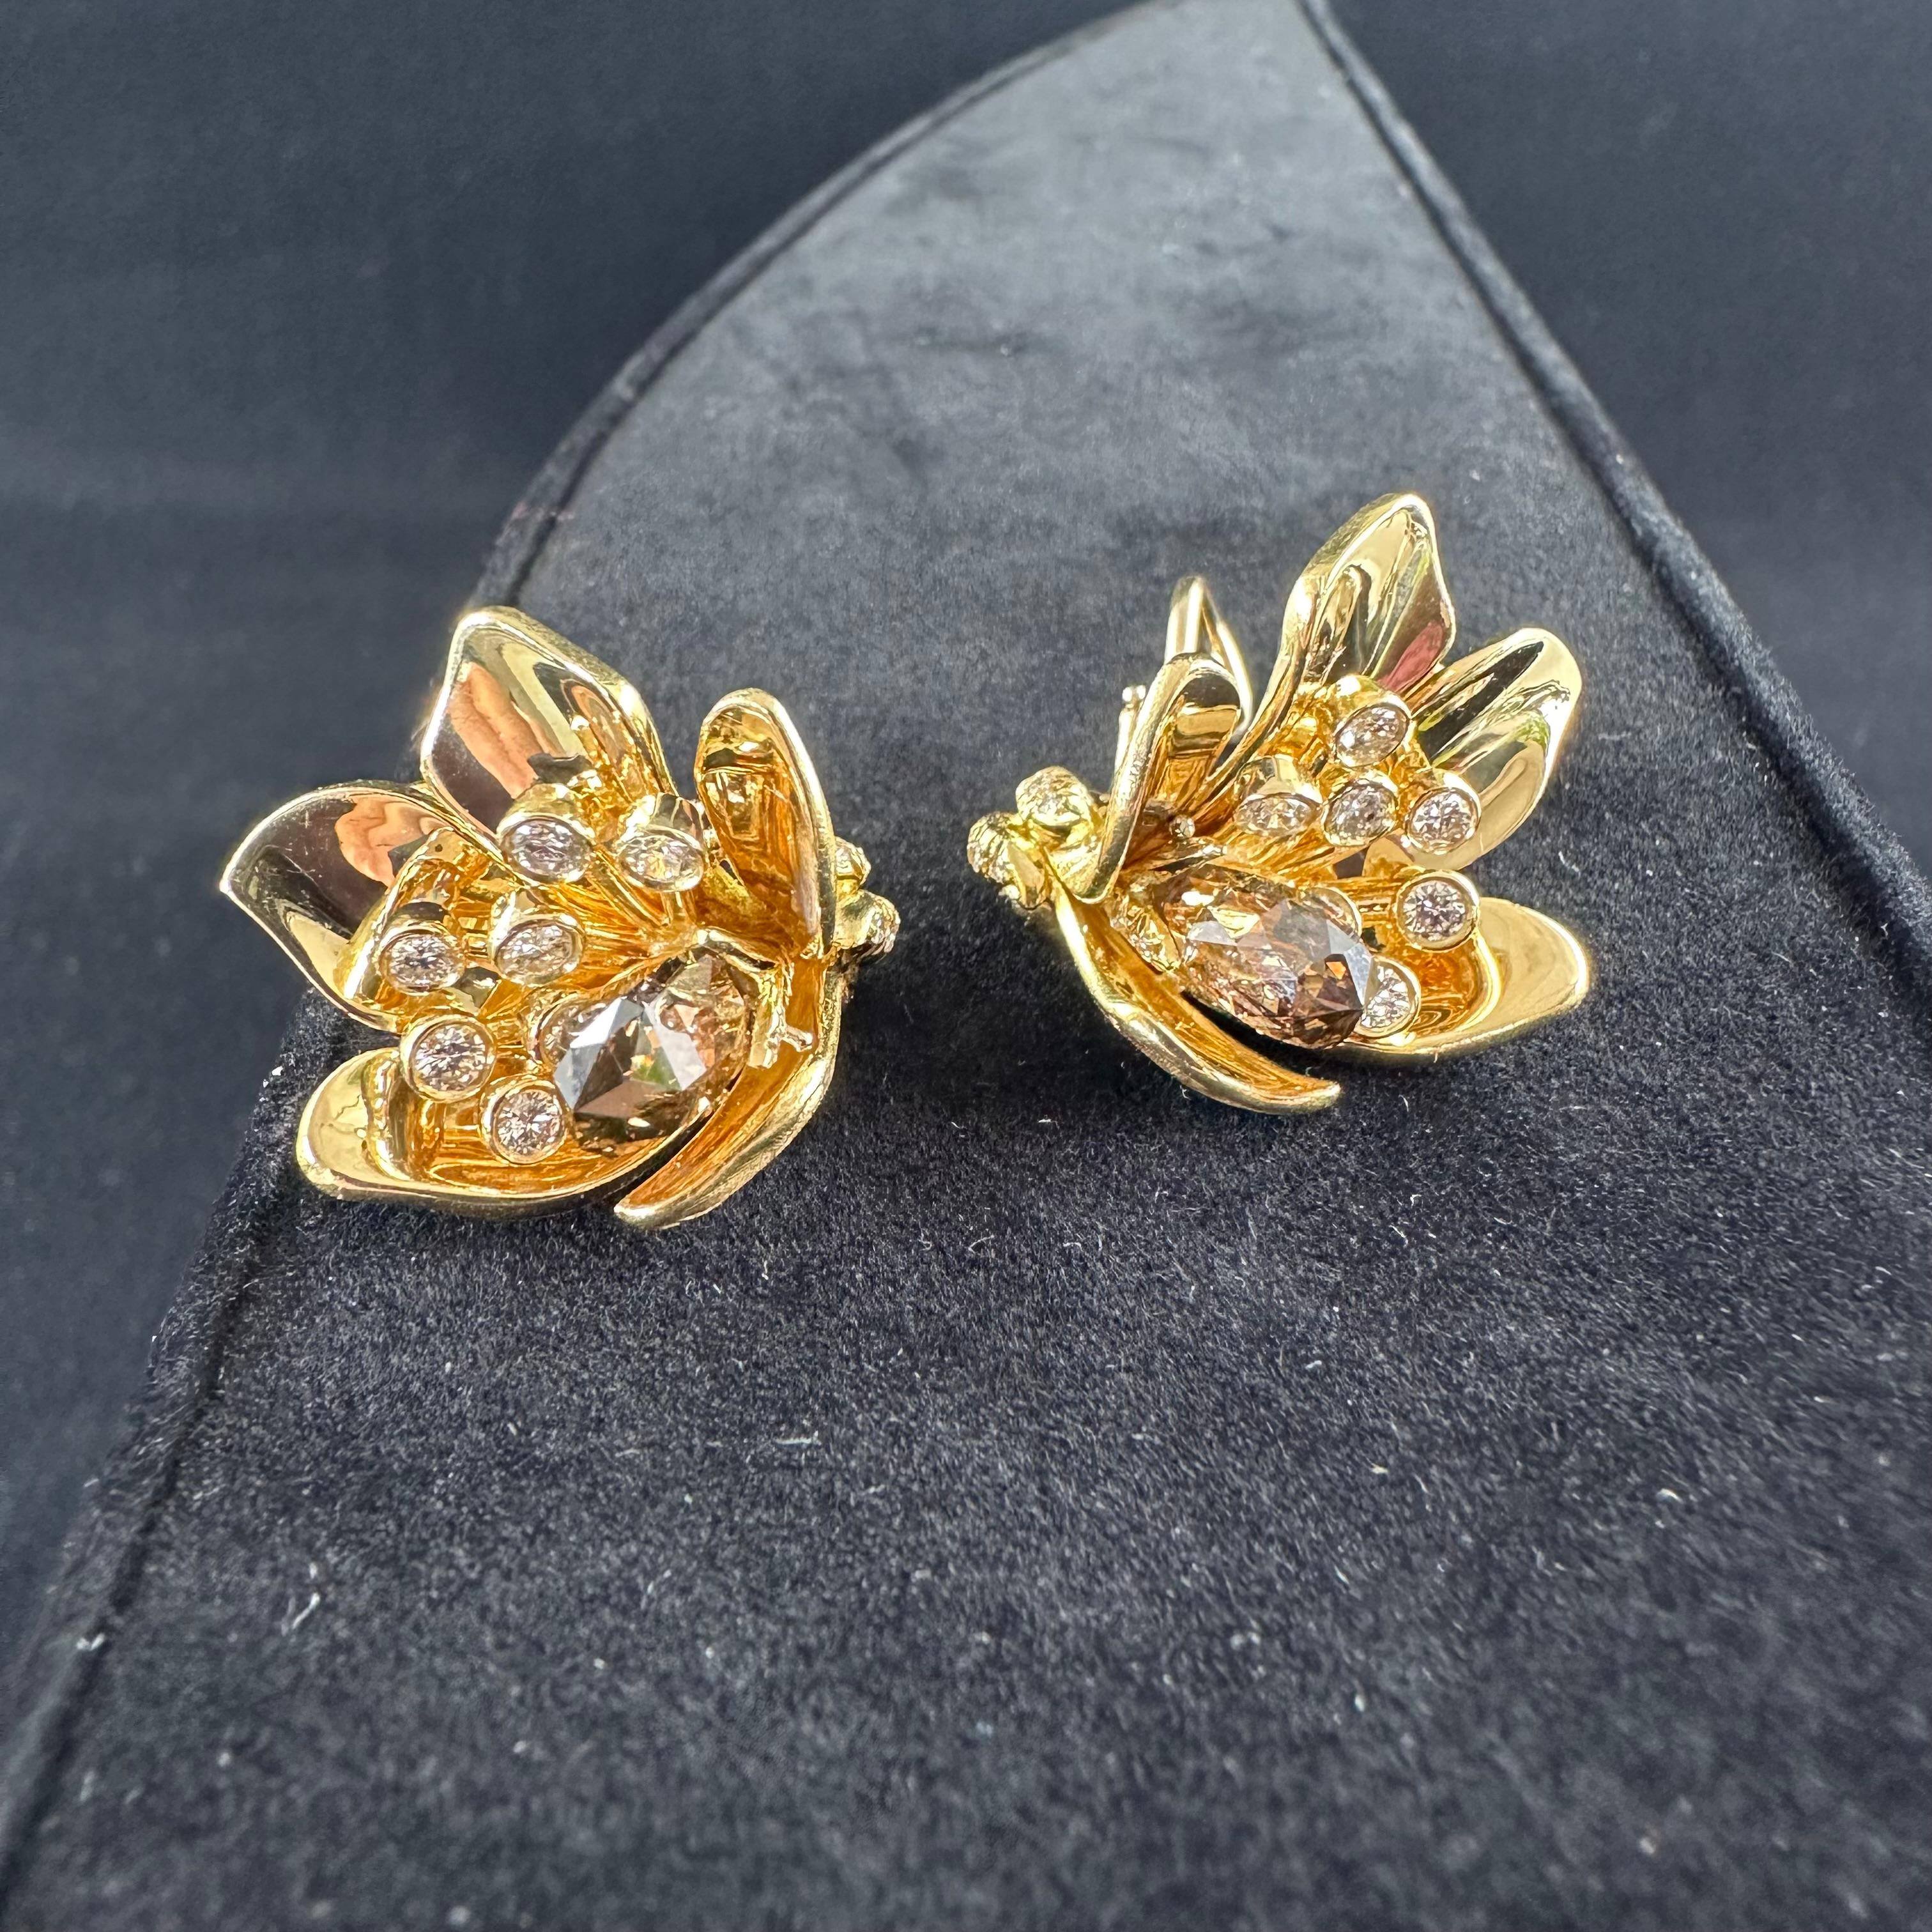 Julius Cohen
Opened in 1955 on East 53rd St Next to the Stork Club and later at 699 Madison Ave , In Short Julius Cohen, A jewelry Designer Who Won Awards. 
Flower motif earrings 18k yellow gold and platinum.
The Earrings consist of 2 Large Brown